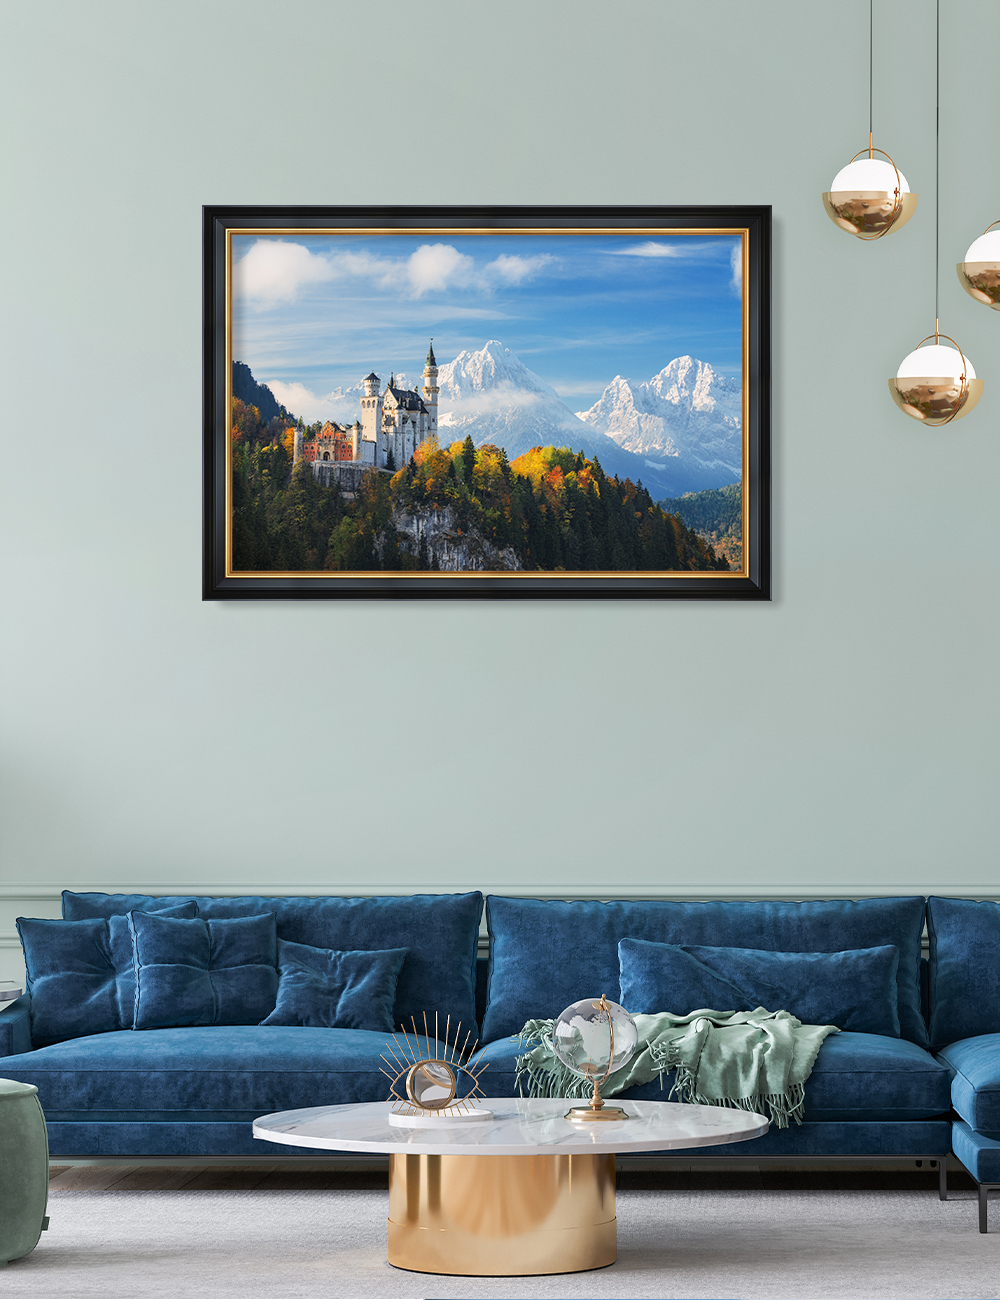 DecorArts The Neuschwanstein Castle Germany, Giclee Print on Acid Free  Cotton Canvas with Matching Classical Solid Wood Frame. Total Size w/Frame:  39.25x27.25